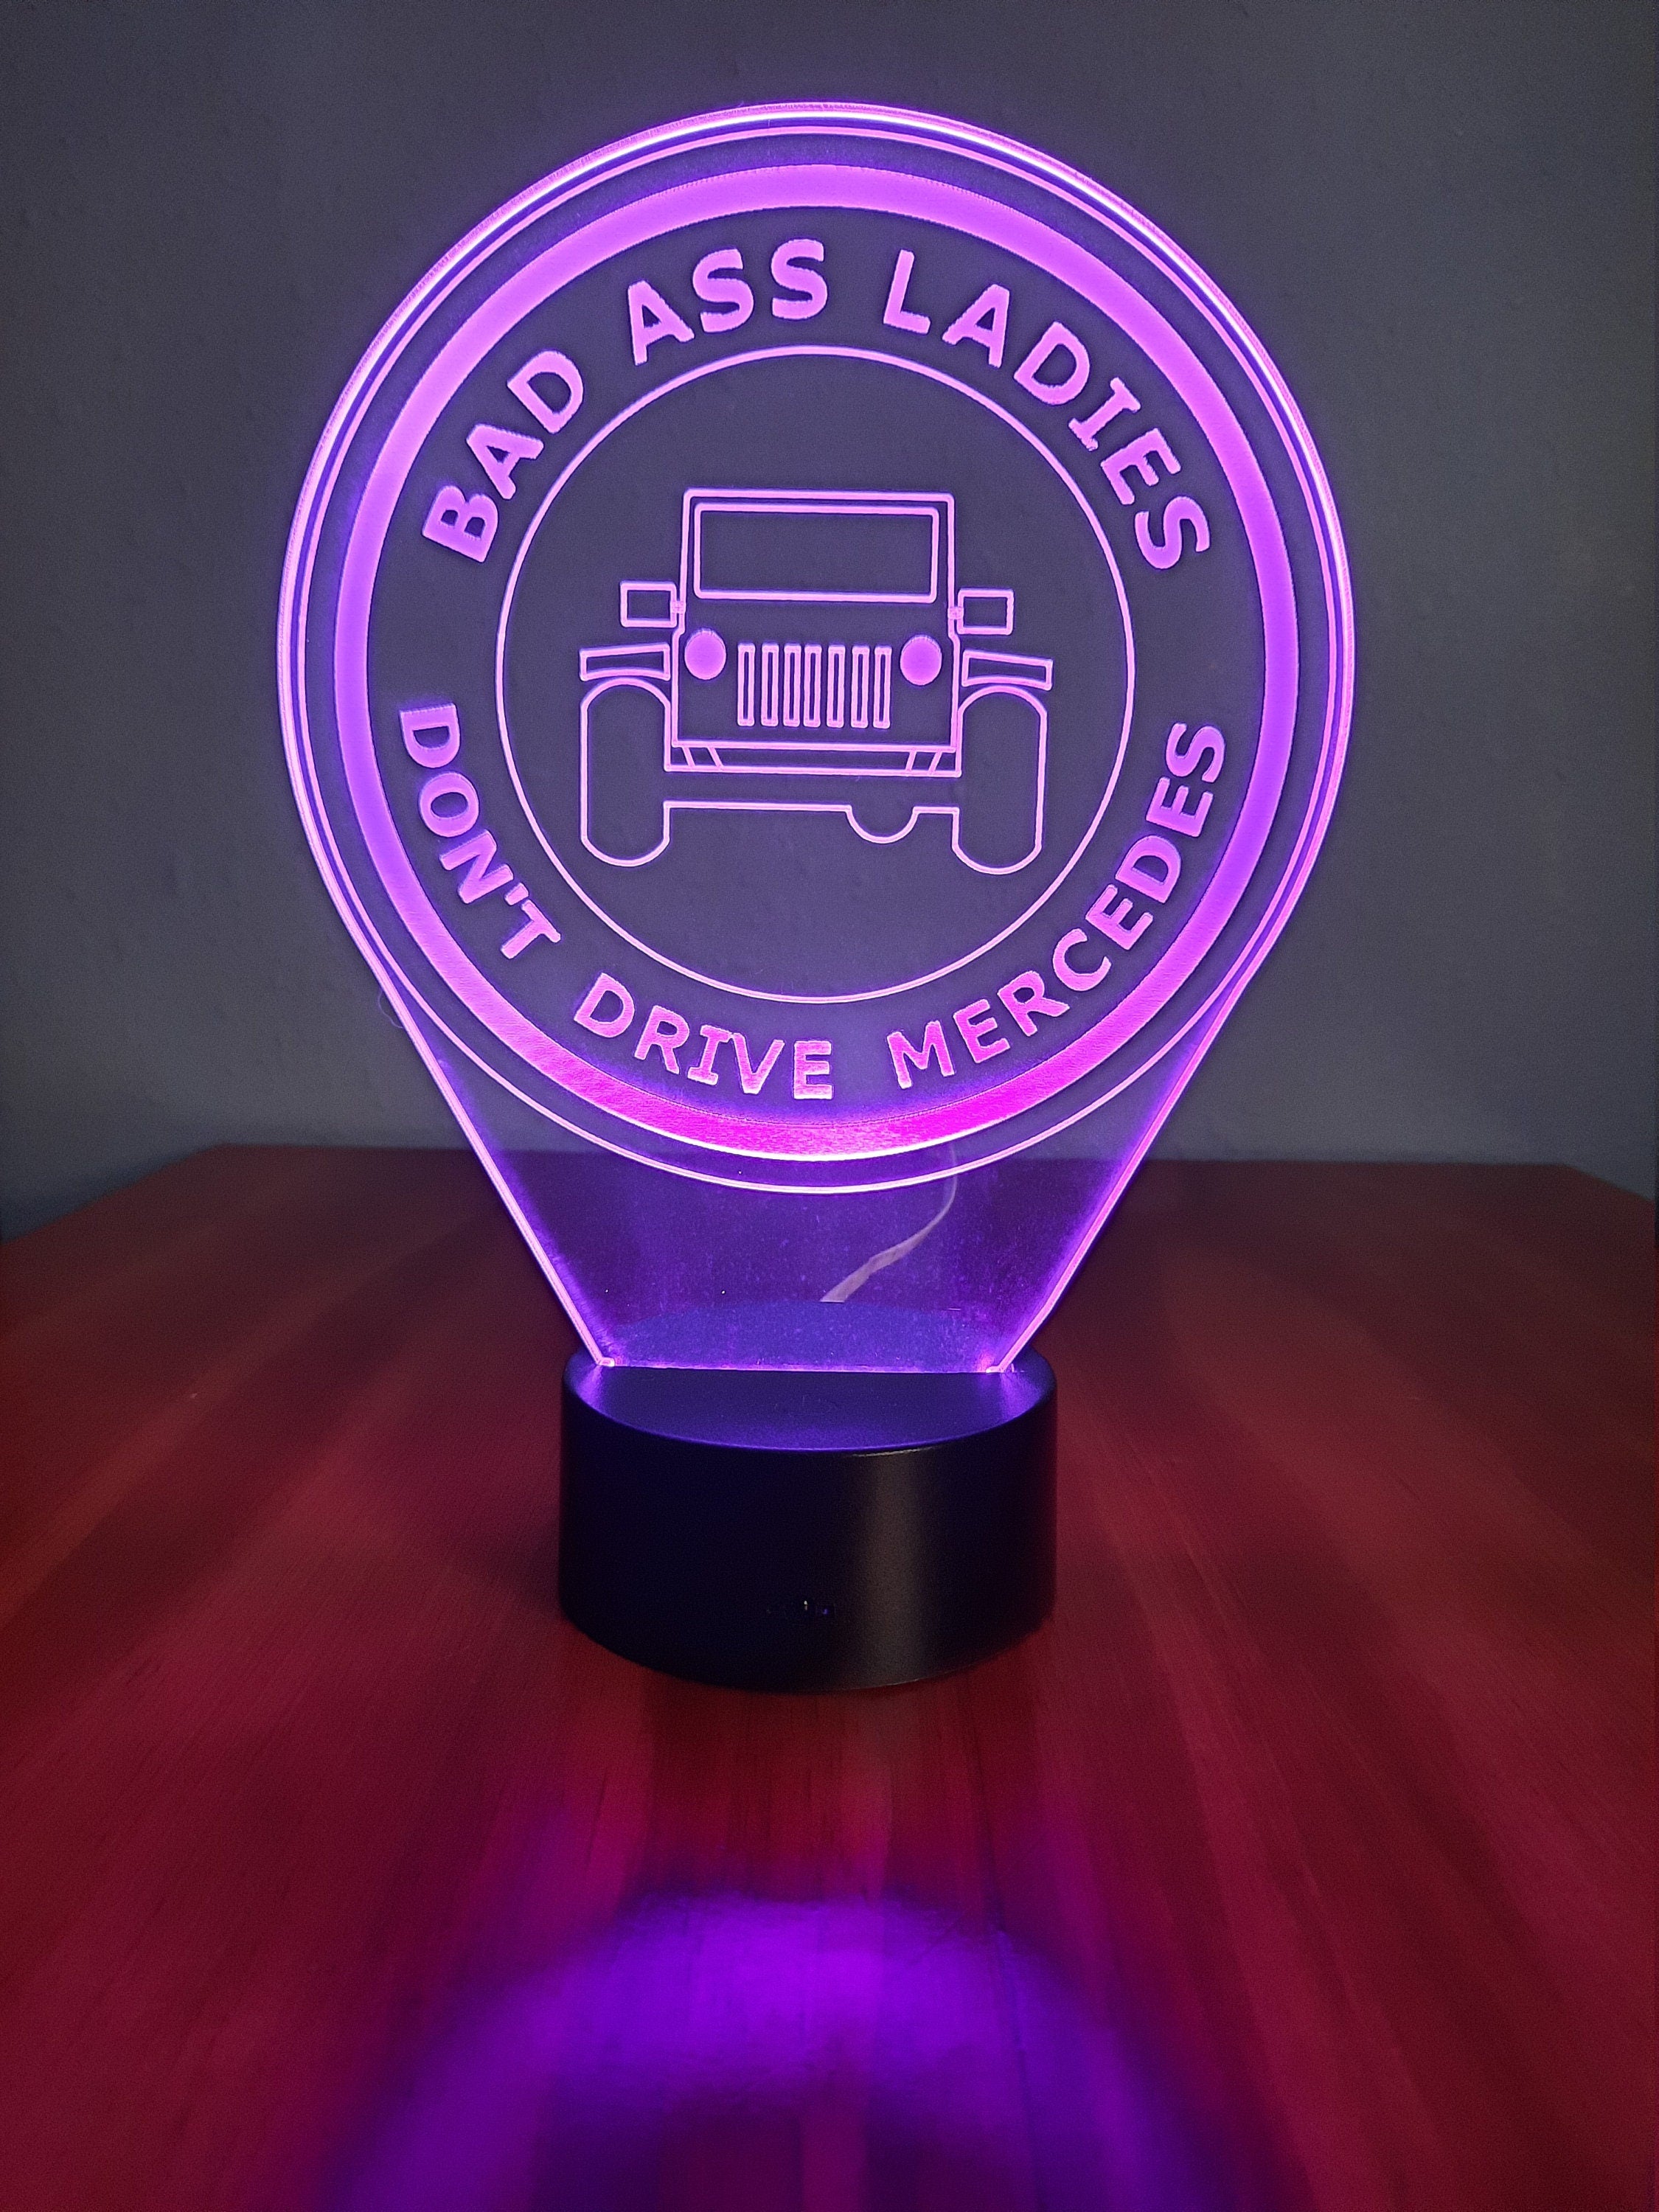 Awesome "Bad Ass Ladies Don't Drive Mercedes" LED Lamp (1264)